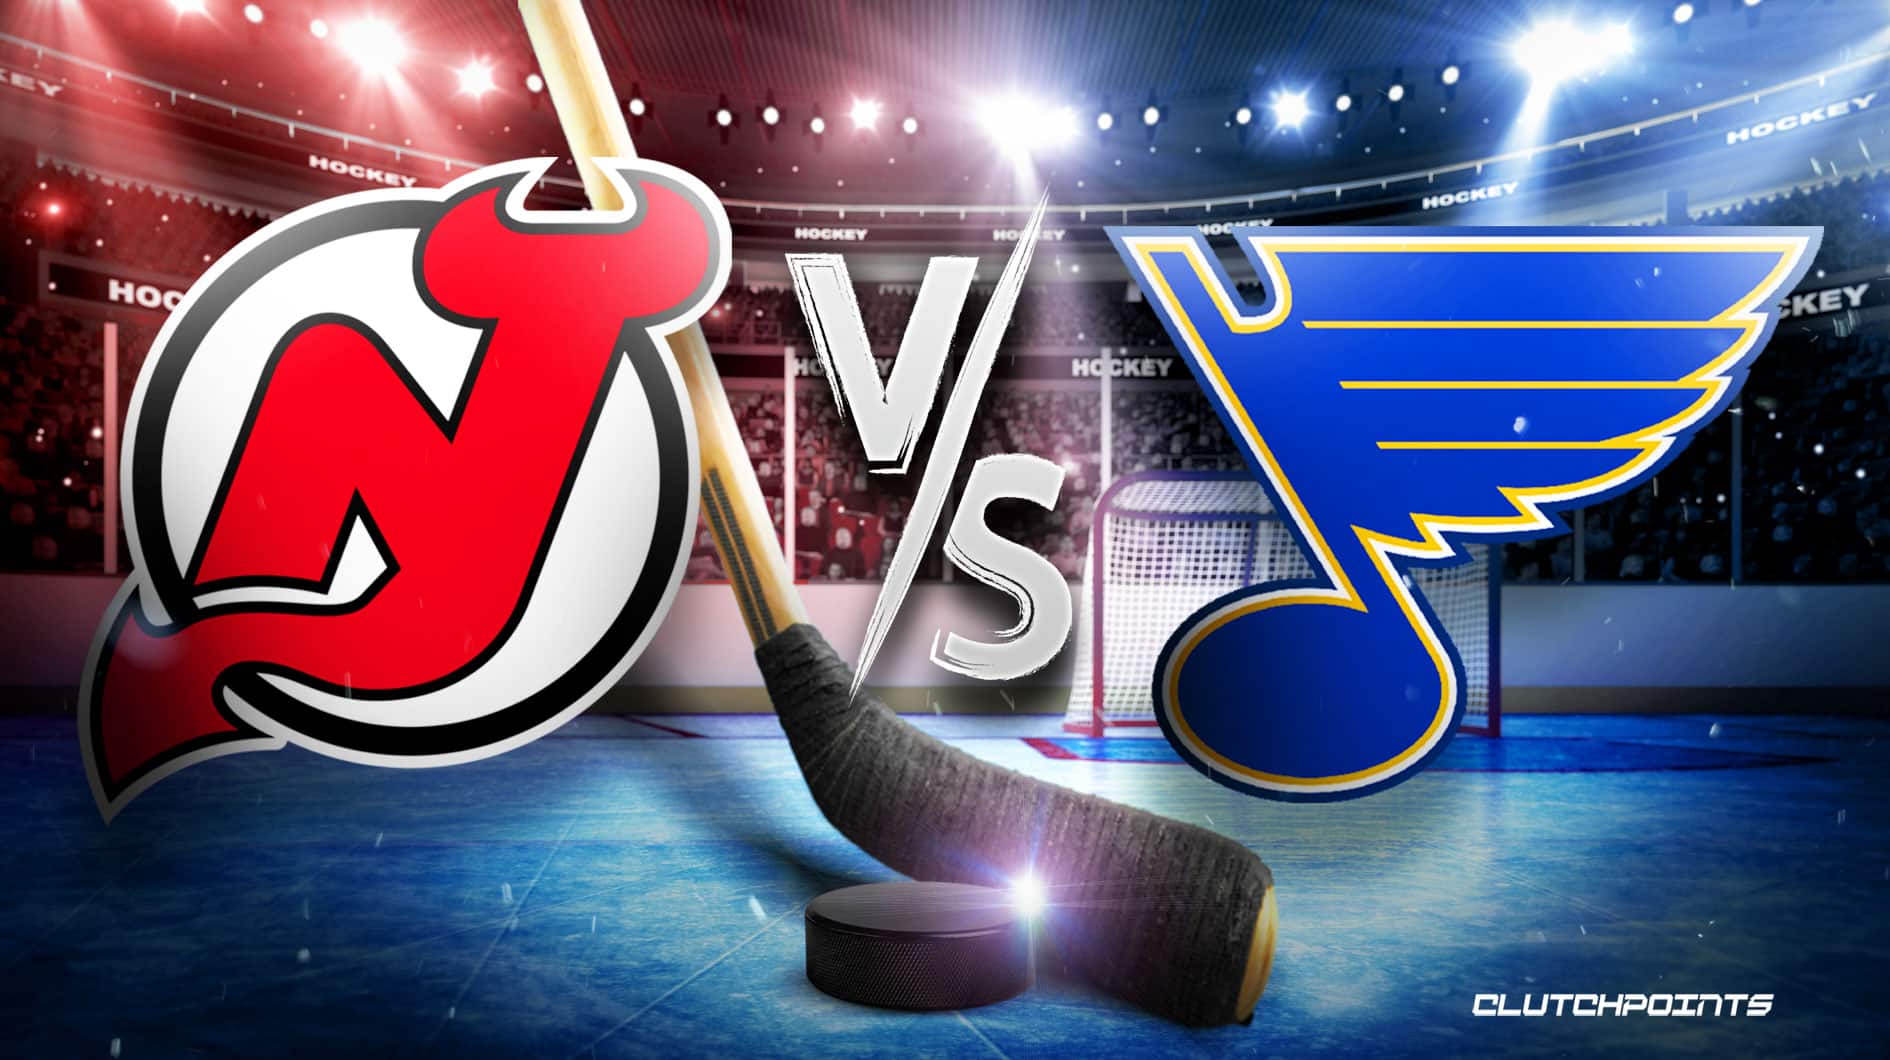 St. Louis Blues Gameday Preview: New Jersey Devils - 1/5/23